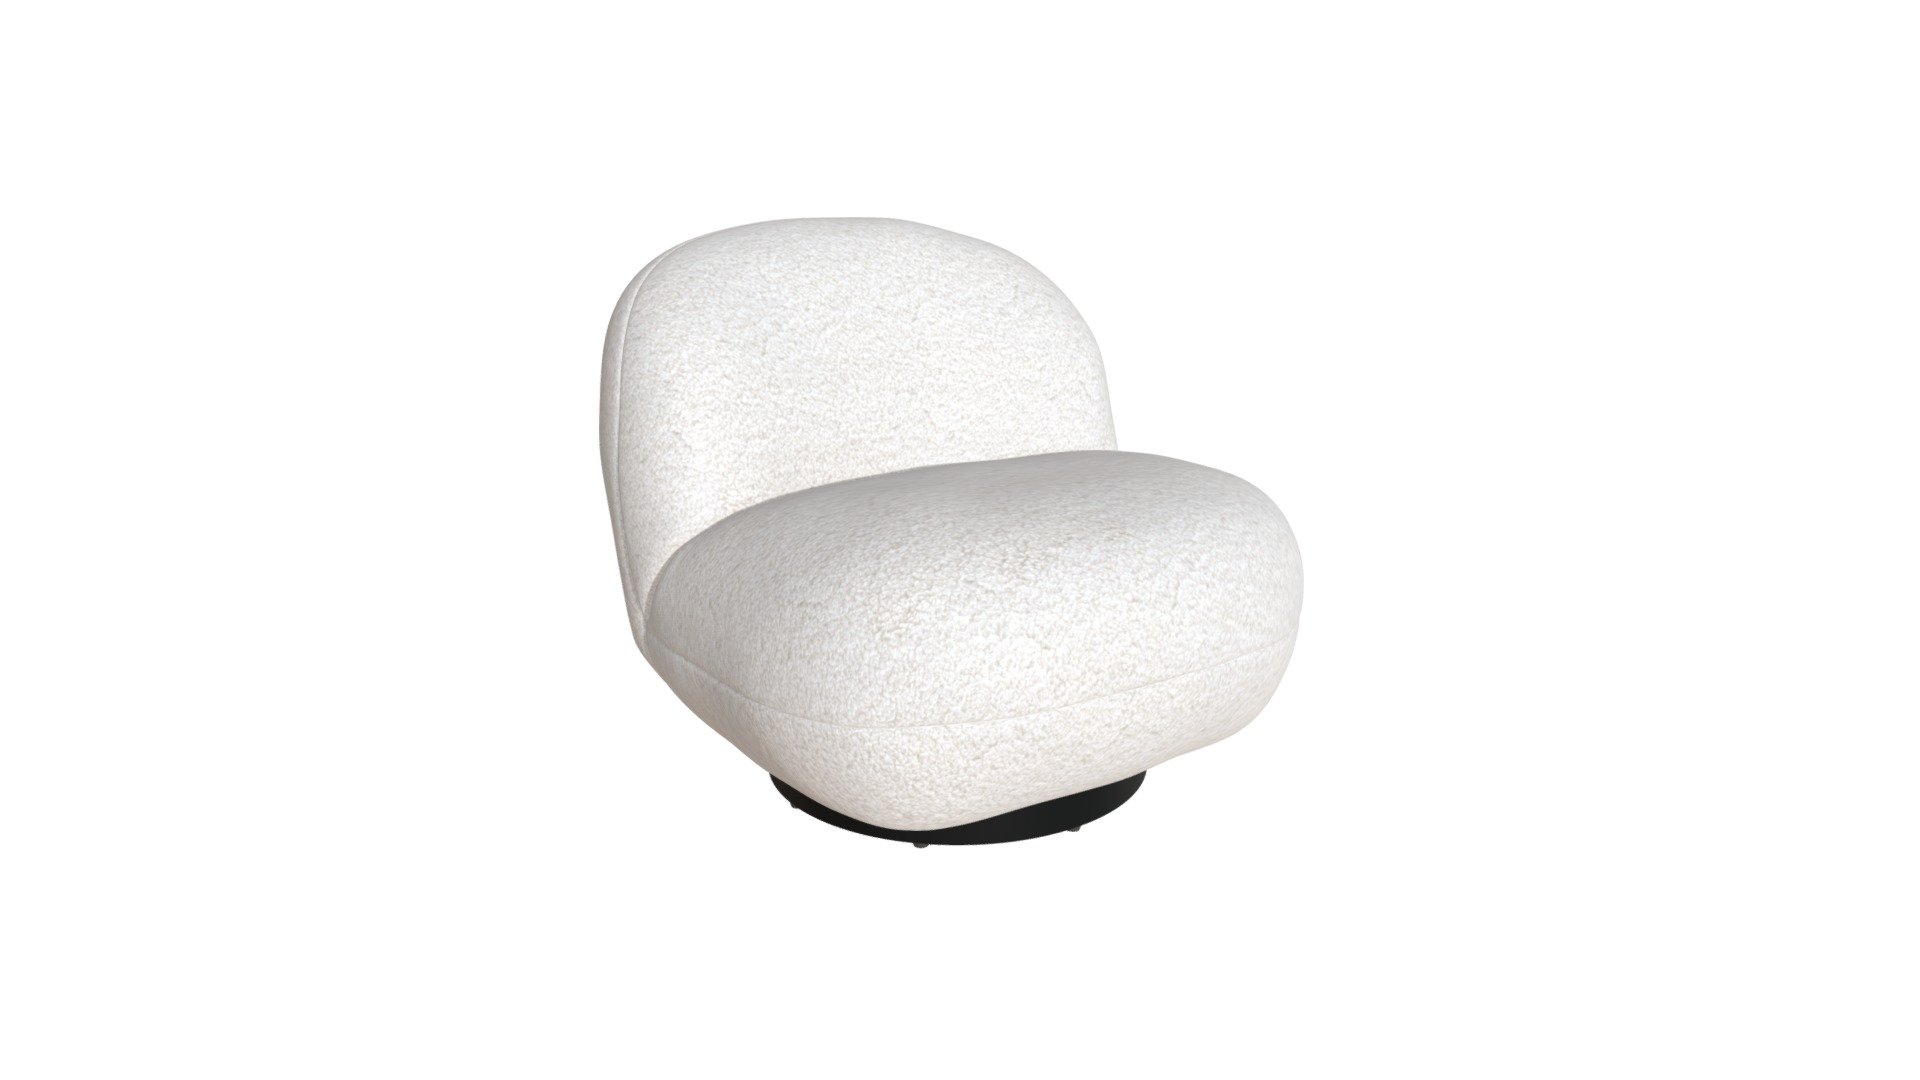 https://www.zuomod.com/109345-myanmar-accent-chair-cream
The Myanmar Accent Chair has a polyester boucle style fabric.This chair works great in any space, hospitality or residential. The shape and design are glam, modern, deco and boho all at the same time 3d model